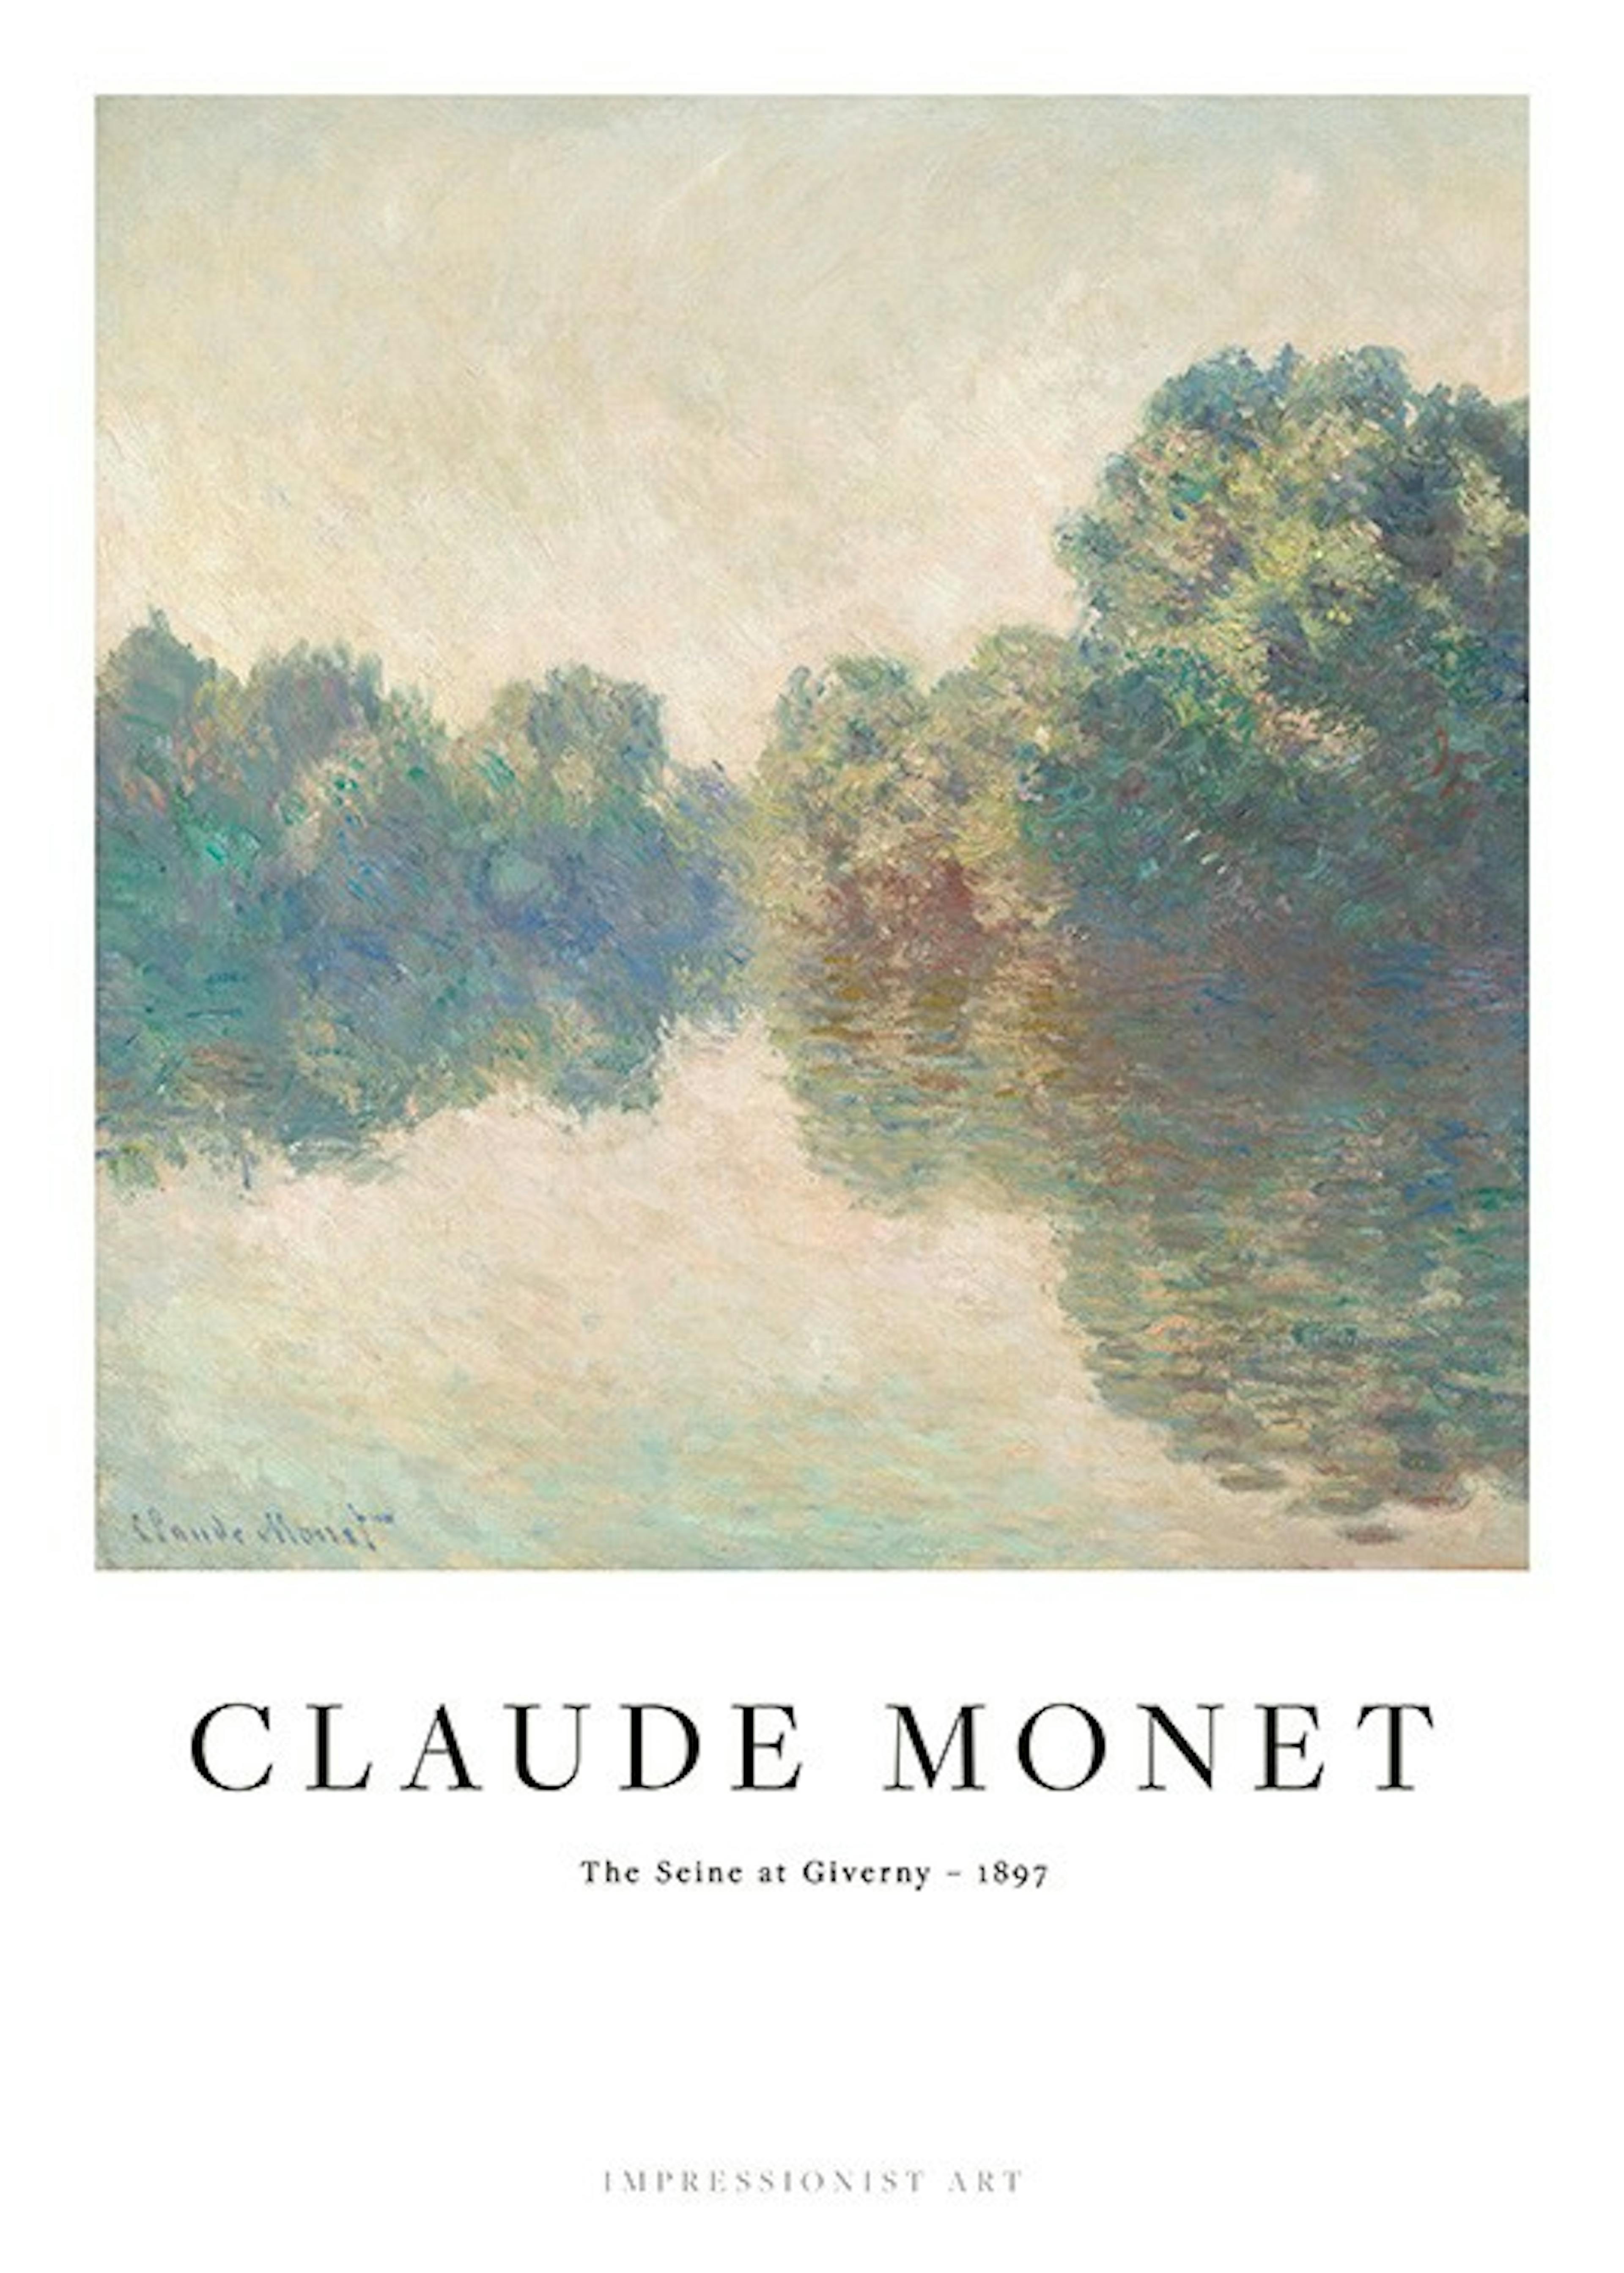 Monet - The Seine at Giverny Poster 0